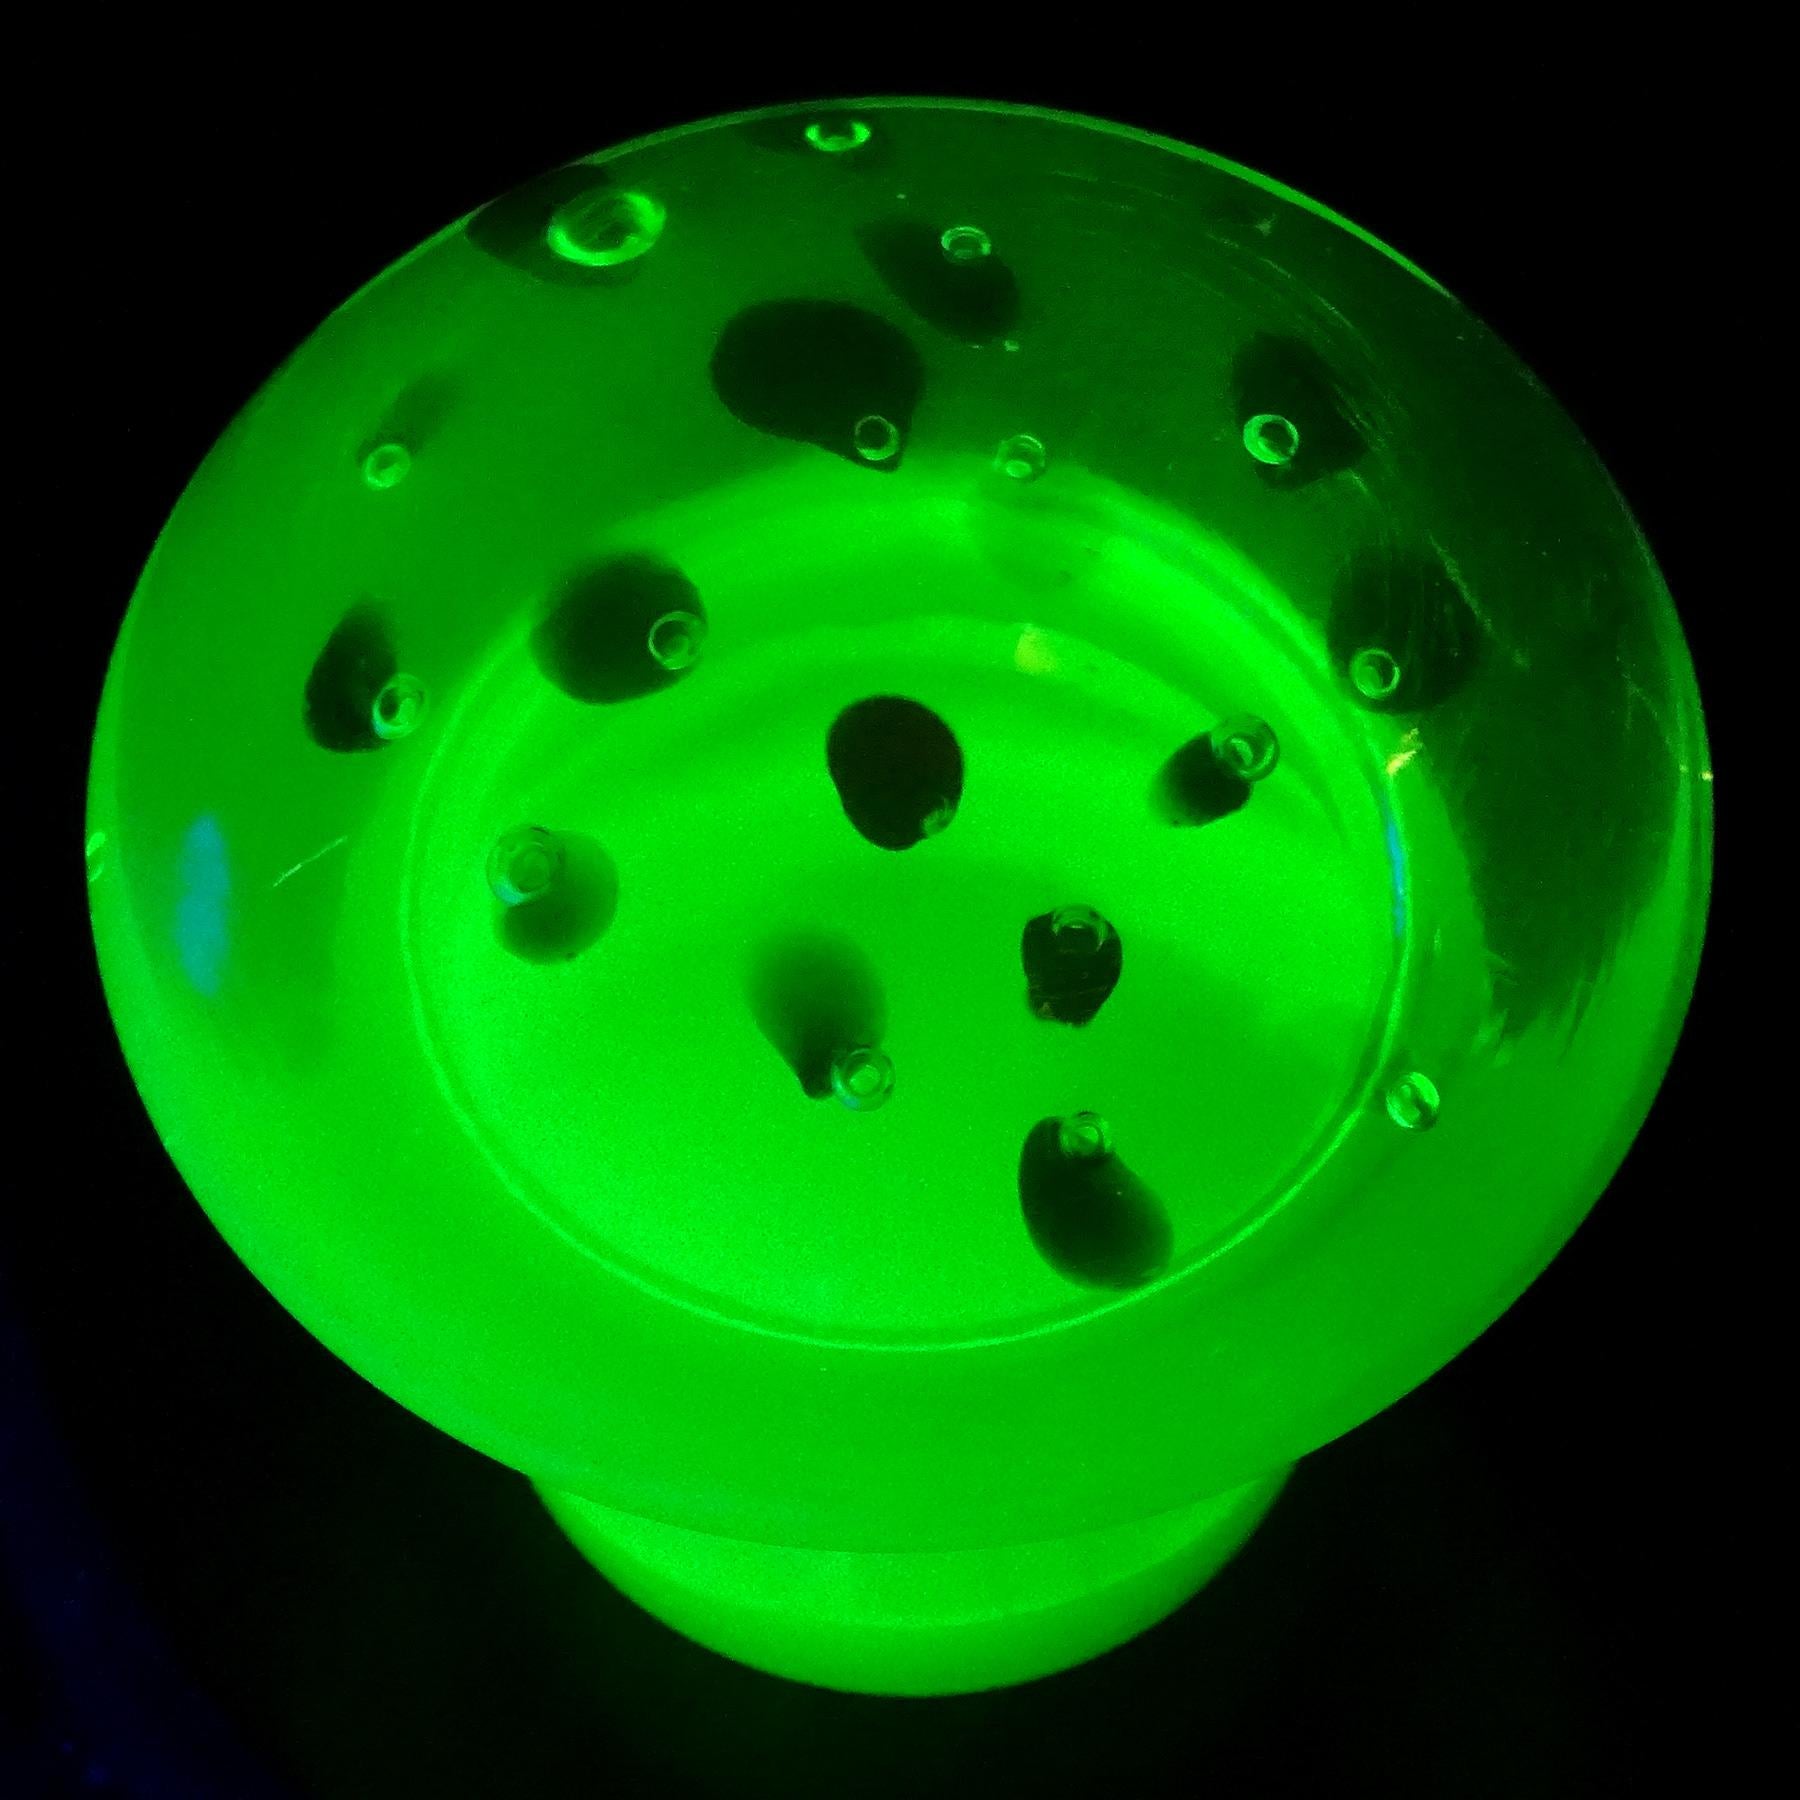 Cenedese Murano Sommerso Glowing Uranium Green Art Glass Mushroom Paperweight In Good Condition For Sale In Kissimmee, FL